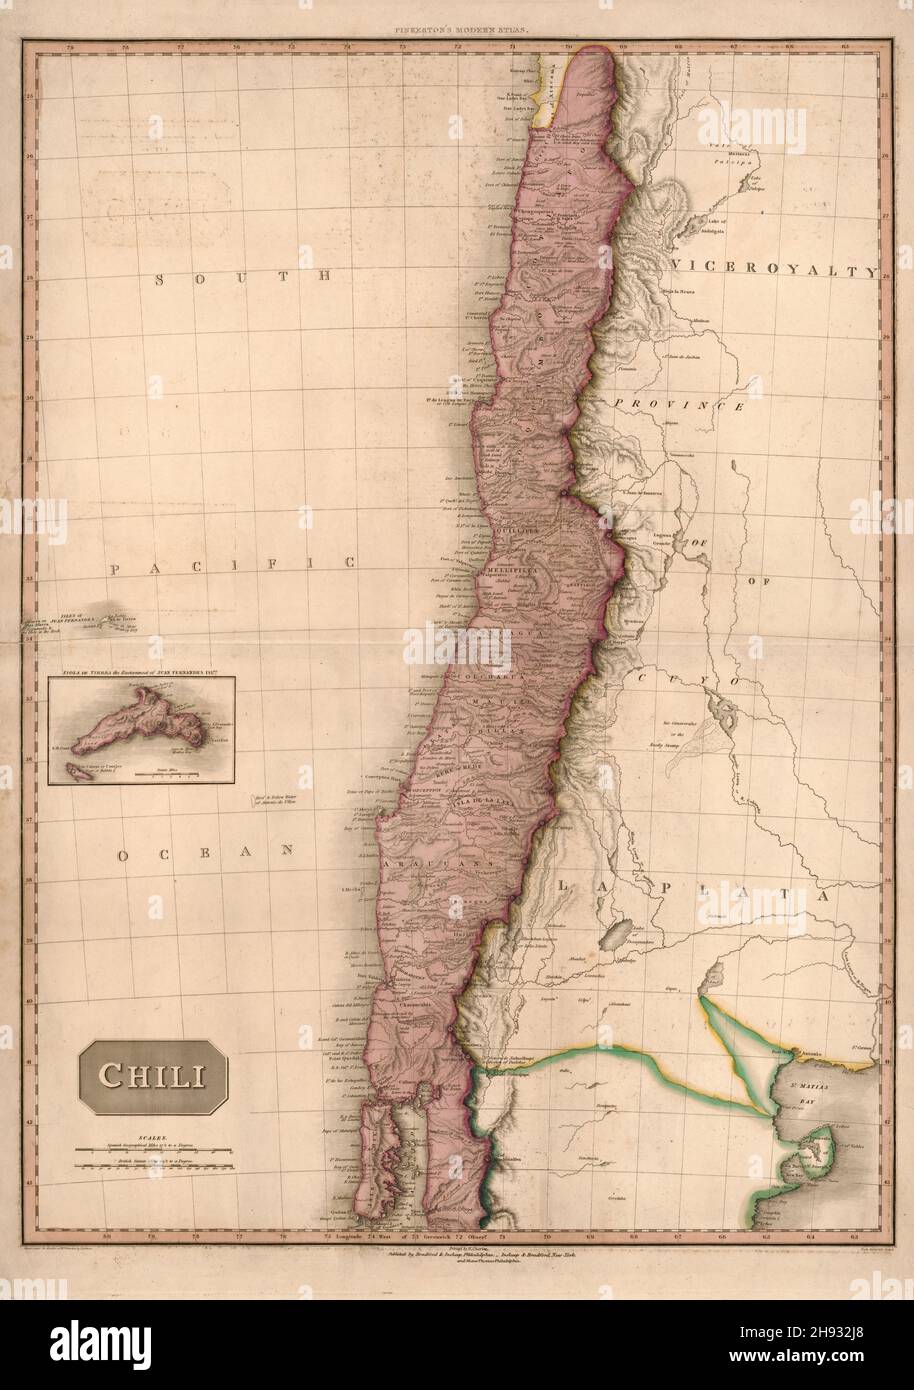 Nineteenth century map map of Chile in South America, ca. 1818 Stock Photo